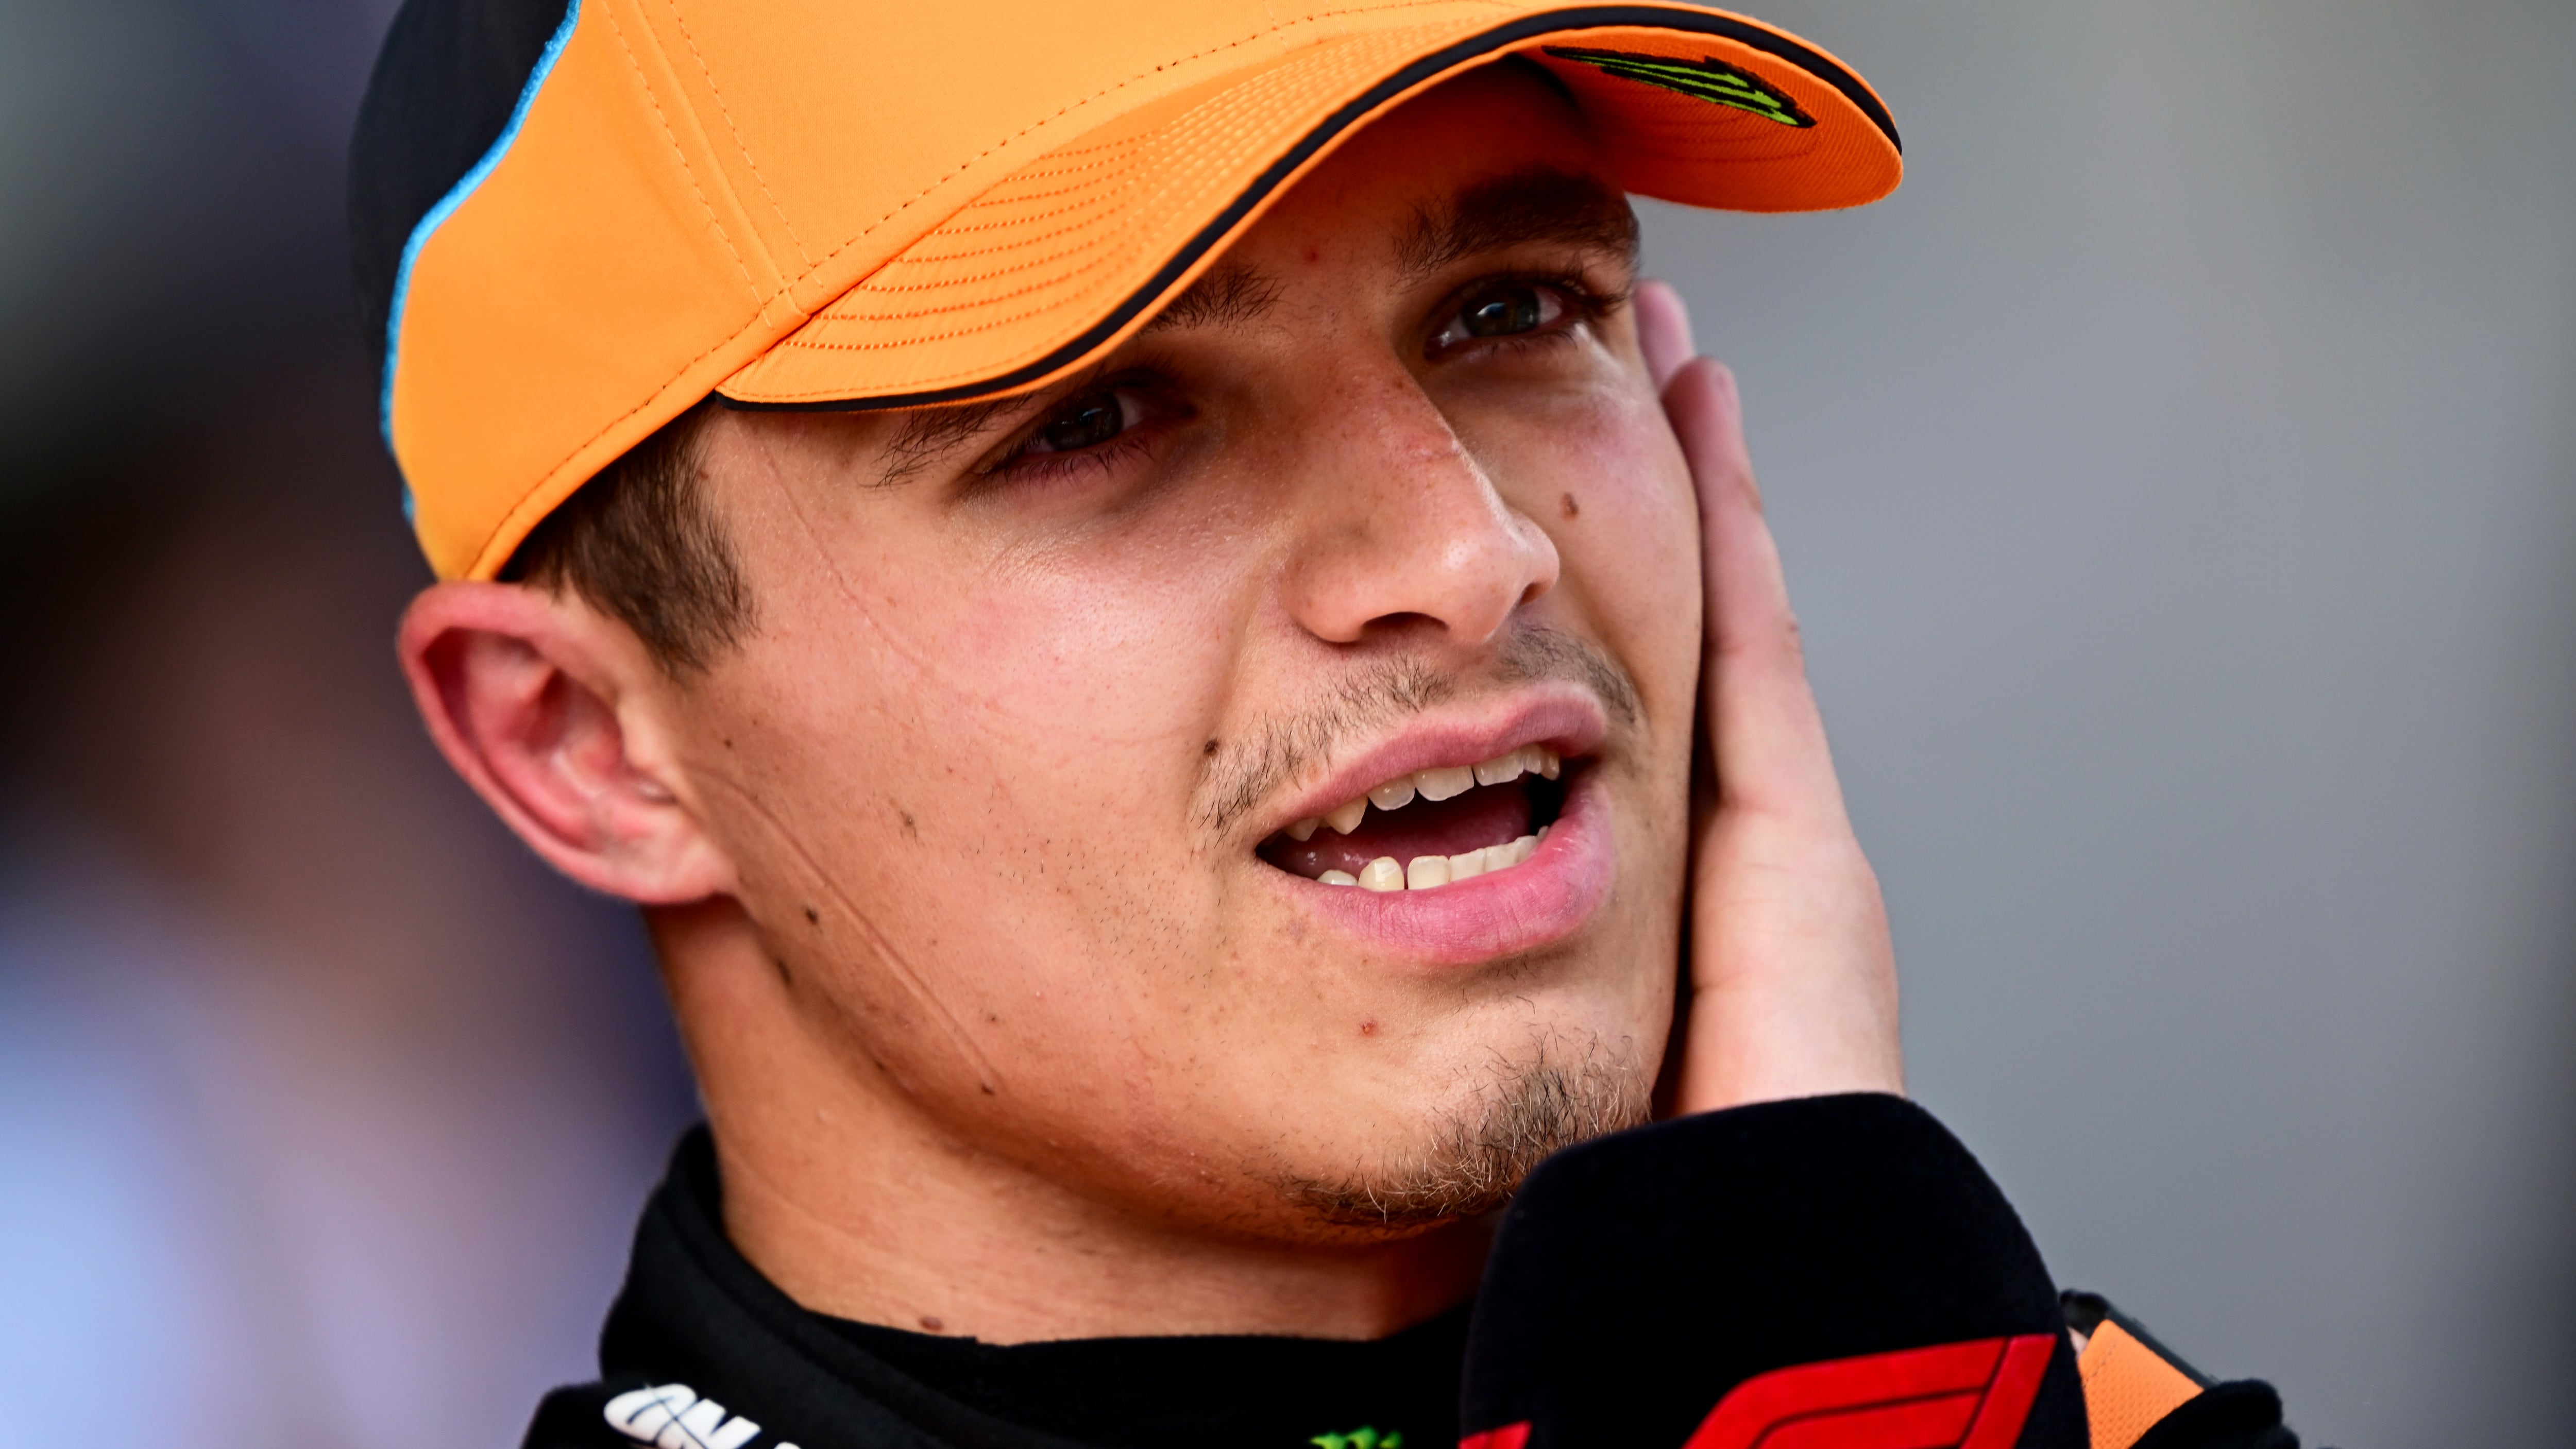 McLaren driver Lando Norris, pictured, no longer expects an apology from Max Verstappen (Christian Bruna/AP)